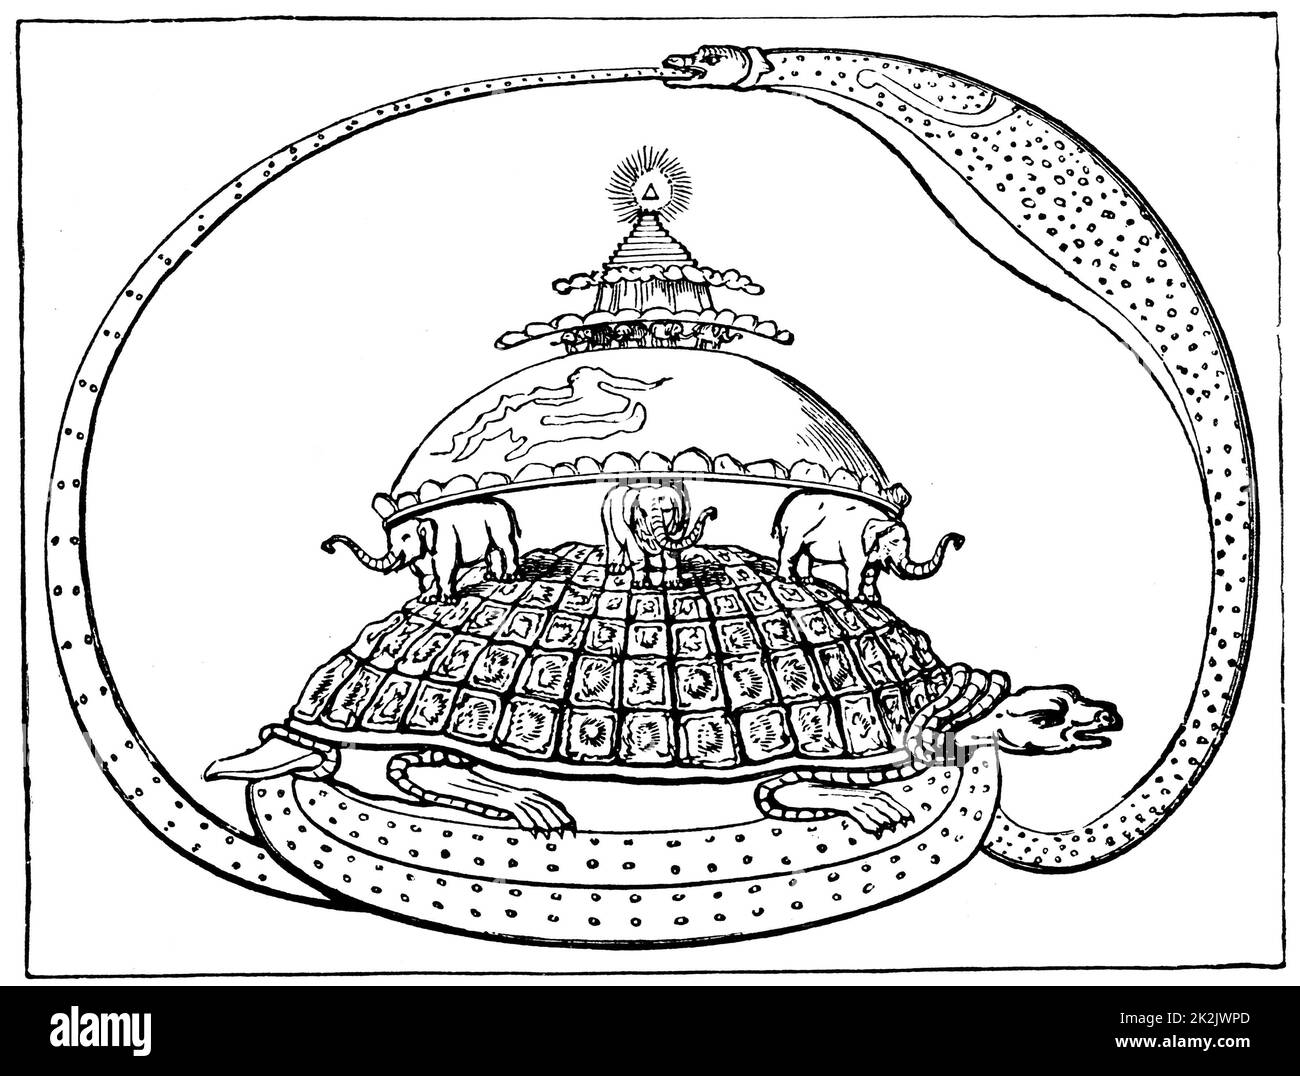 Hindu concpet of the universe, showing it encircled by a serpent, the symbol of eternity. Mount Meru represents paradise, earth below it supported by six elephants, and below this is the infernal region carried by a toirtoise resting on serpent snake. Wood engraving c1880 . Stock Photo